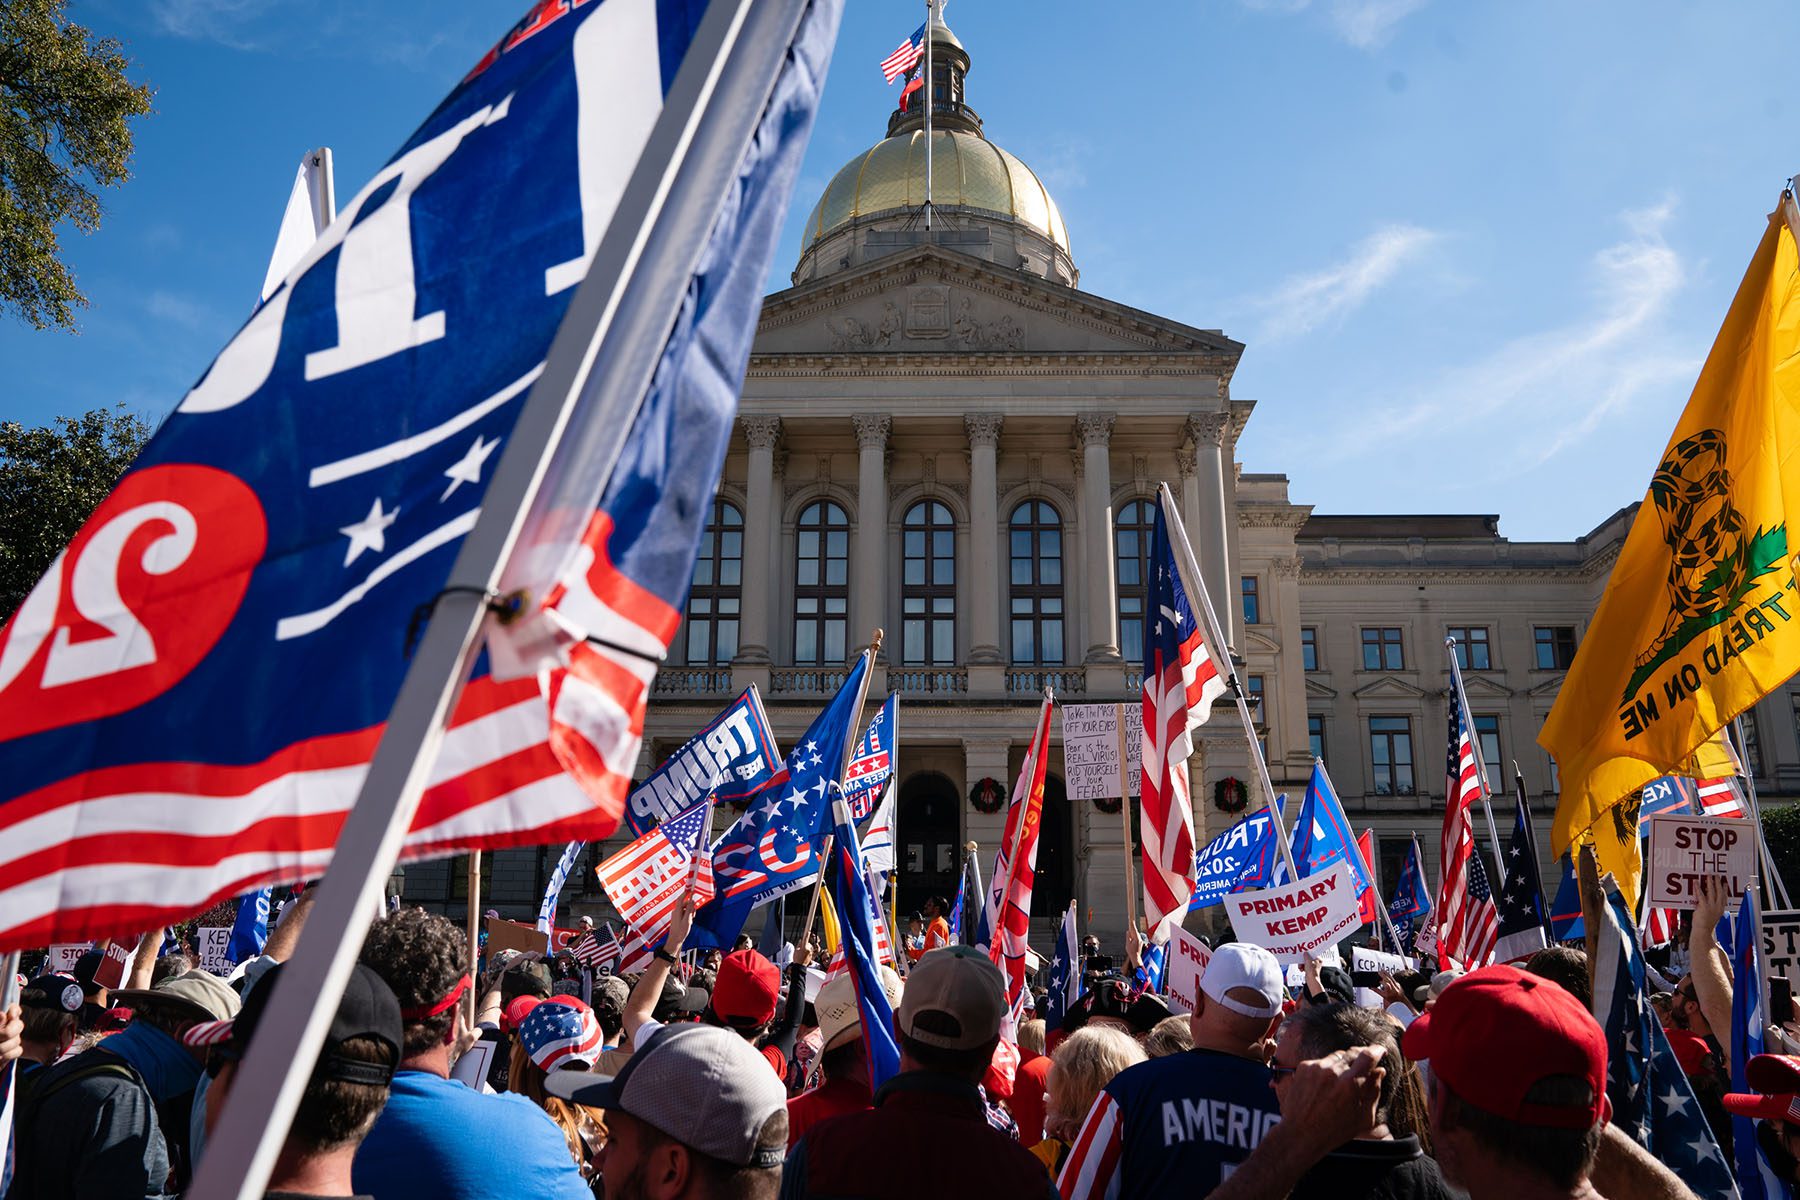 Demonstrators rally outside the Georgia State Capitol during a protest against the results of the 2020 Presidential election. They carry "Trump 2020" flag and signs that read "Stop The Steal."